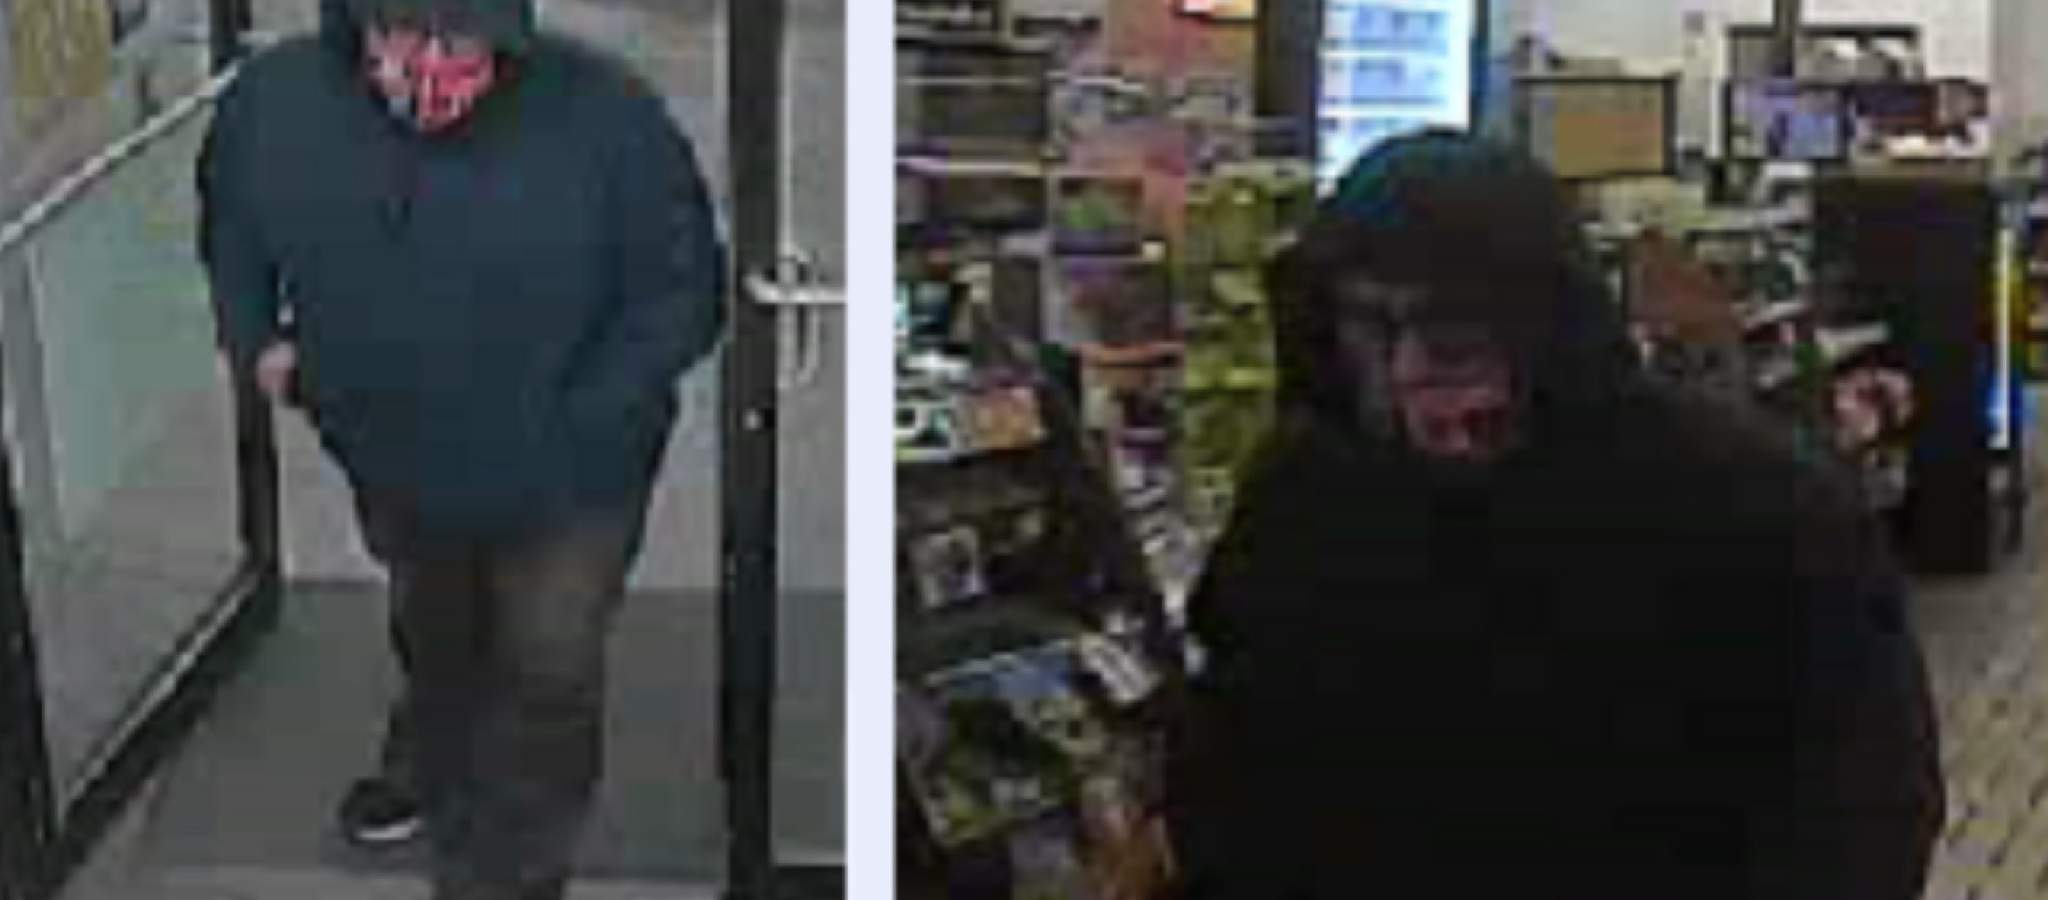 Recognize him? Police, Crime Stoppers seek suspect in robbery of Circle K convenience store